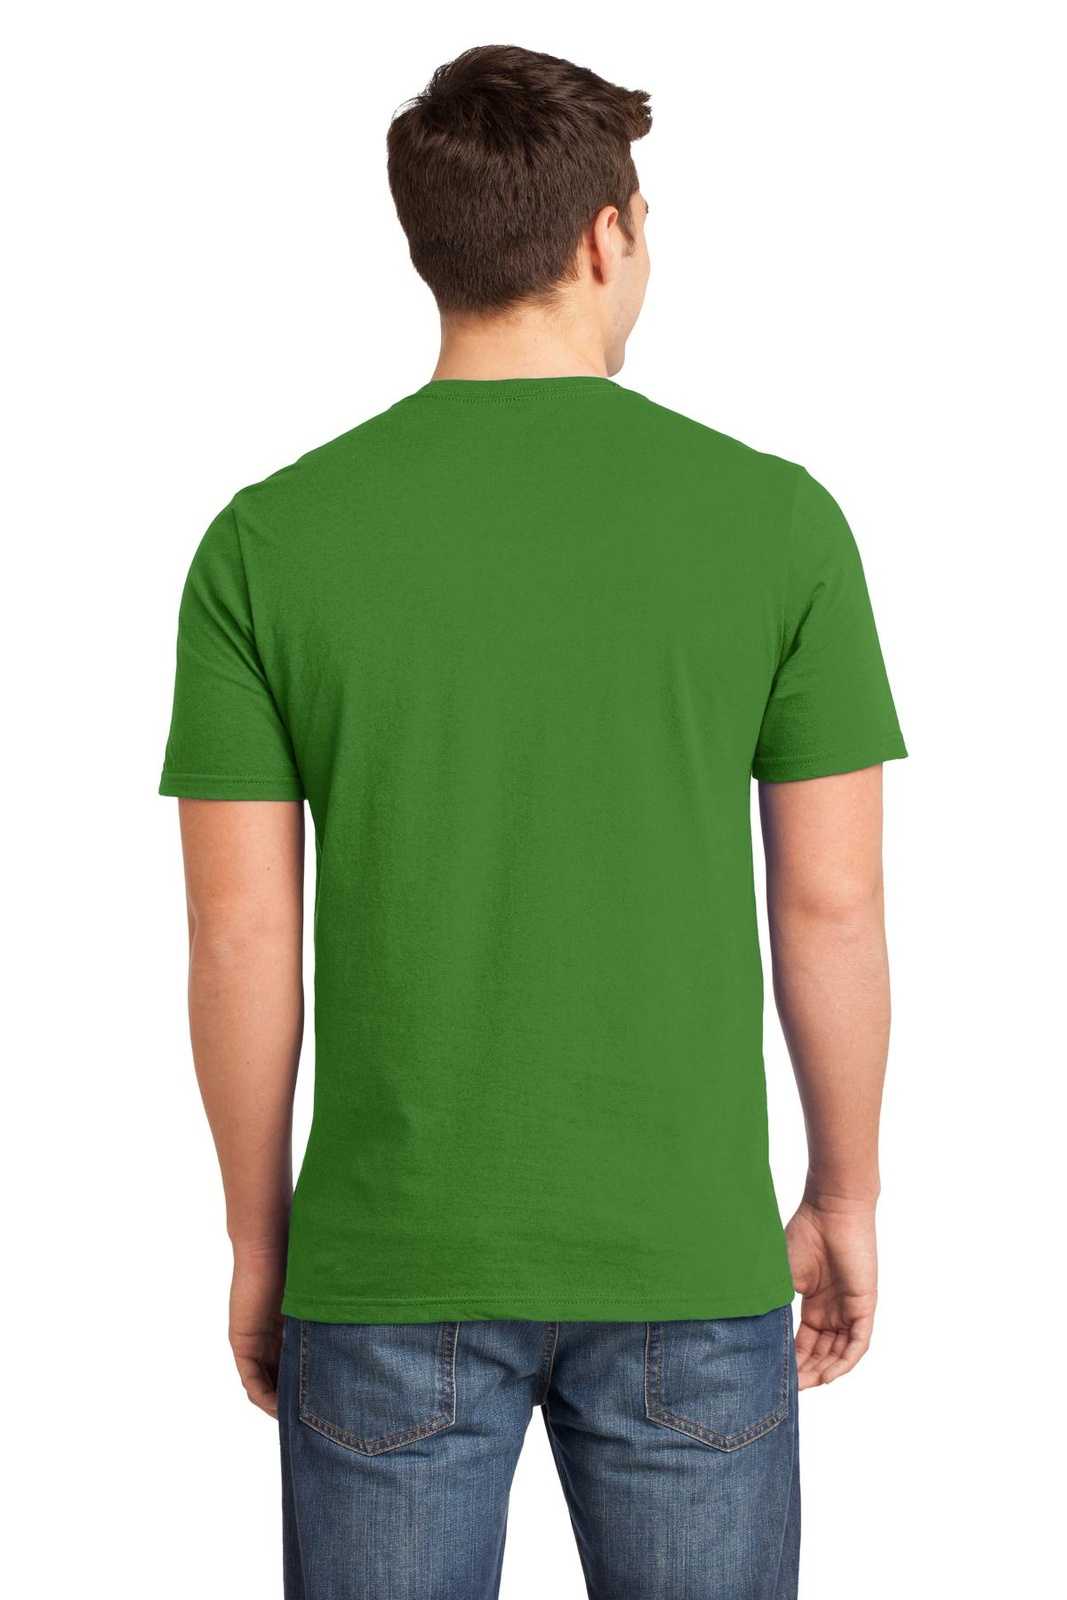 District DT6000 Very Important Tee - Kiwi Green - HIT a Double - 2